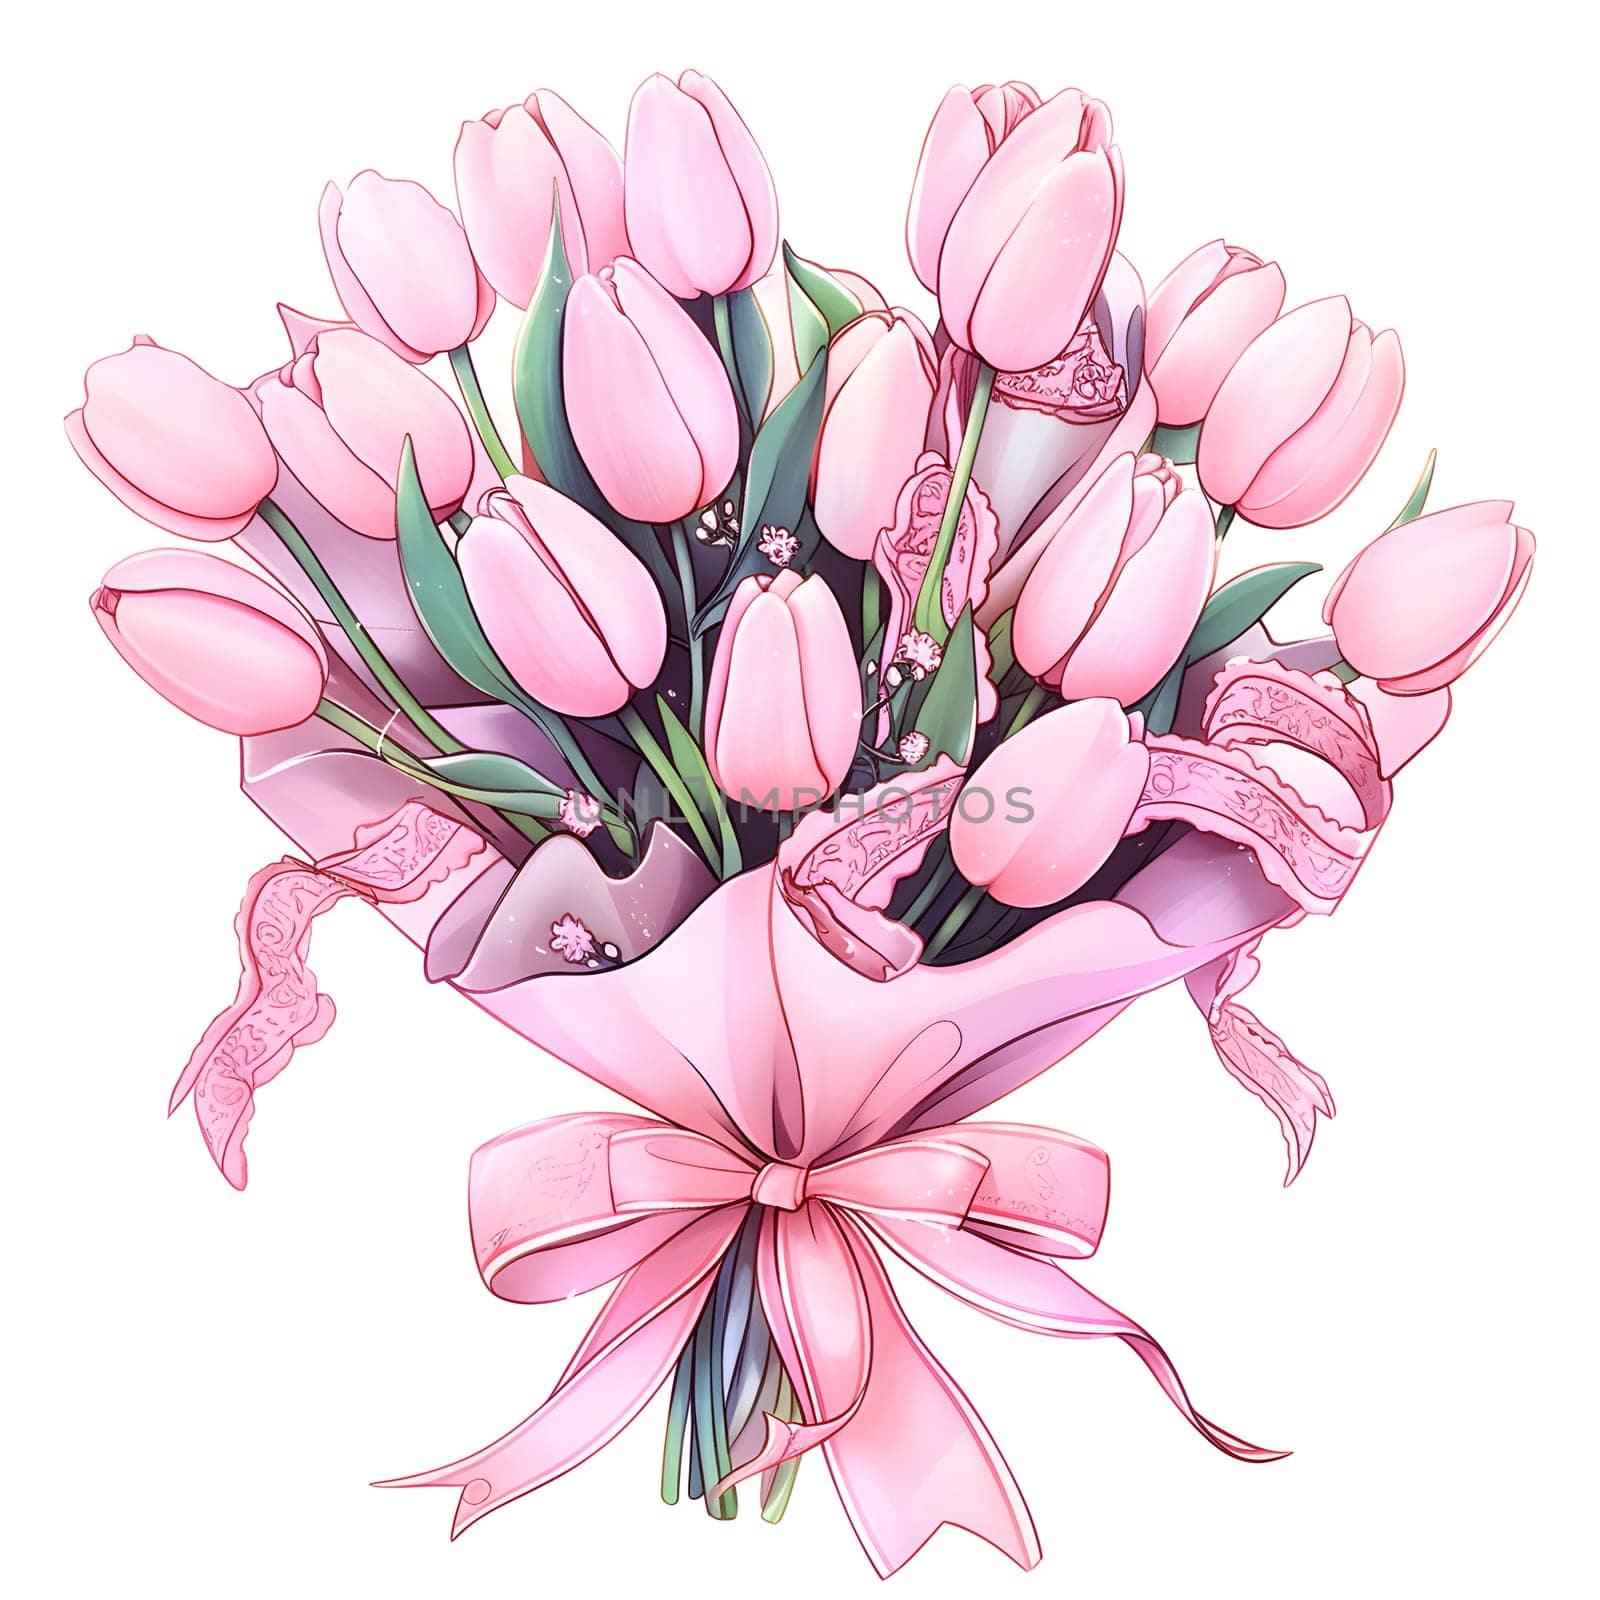 A beautiful arrangement of pink tulips with a matching bow, a lovely gesture by Nadtochiy